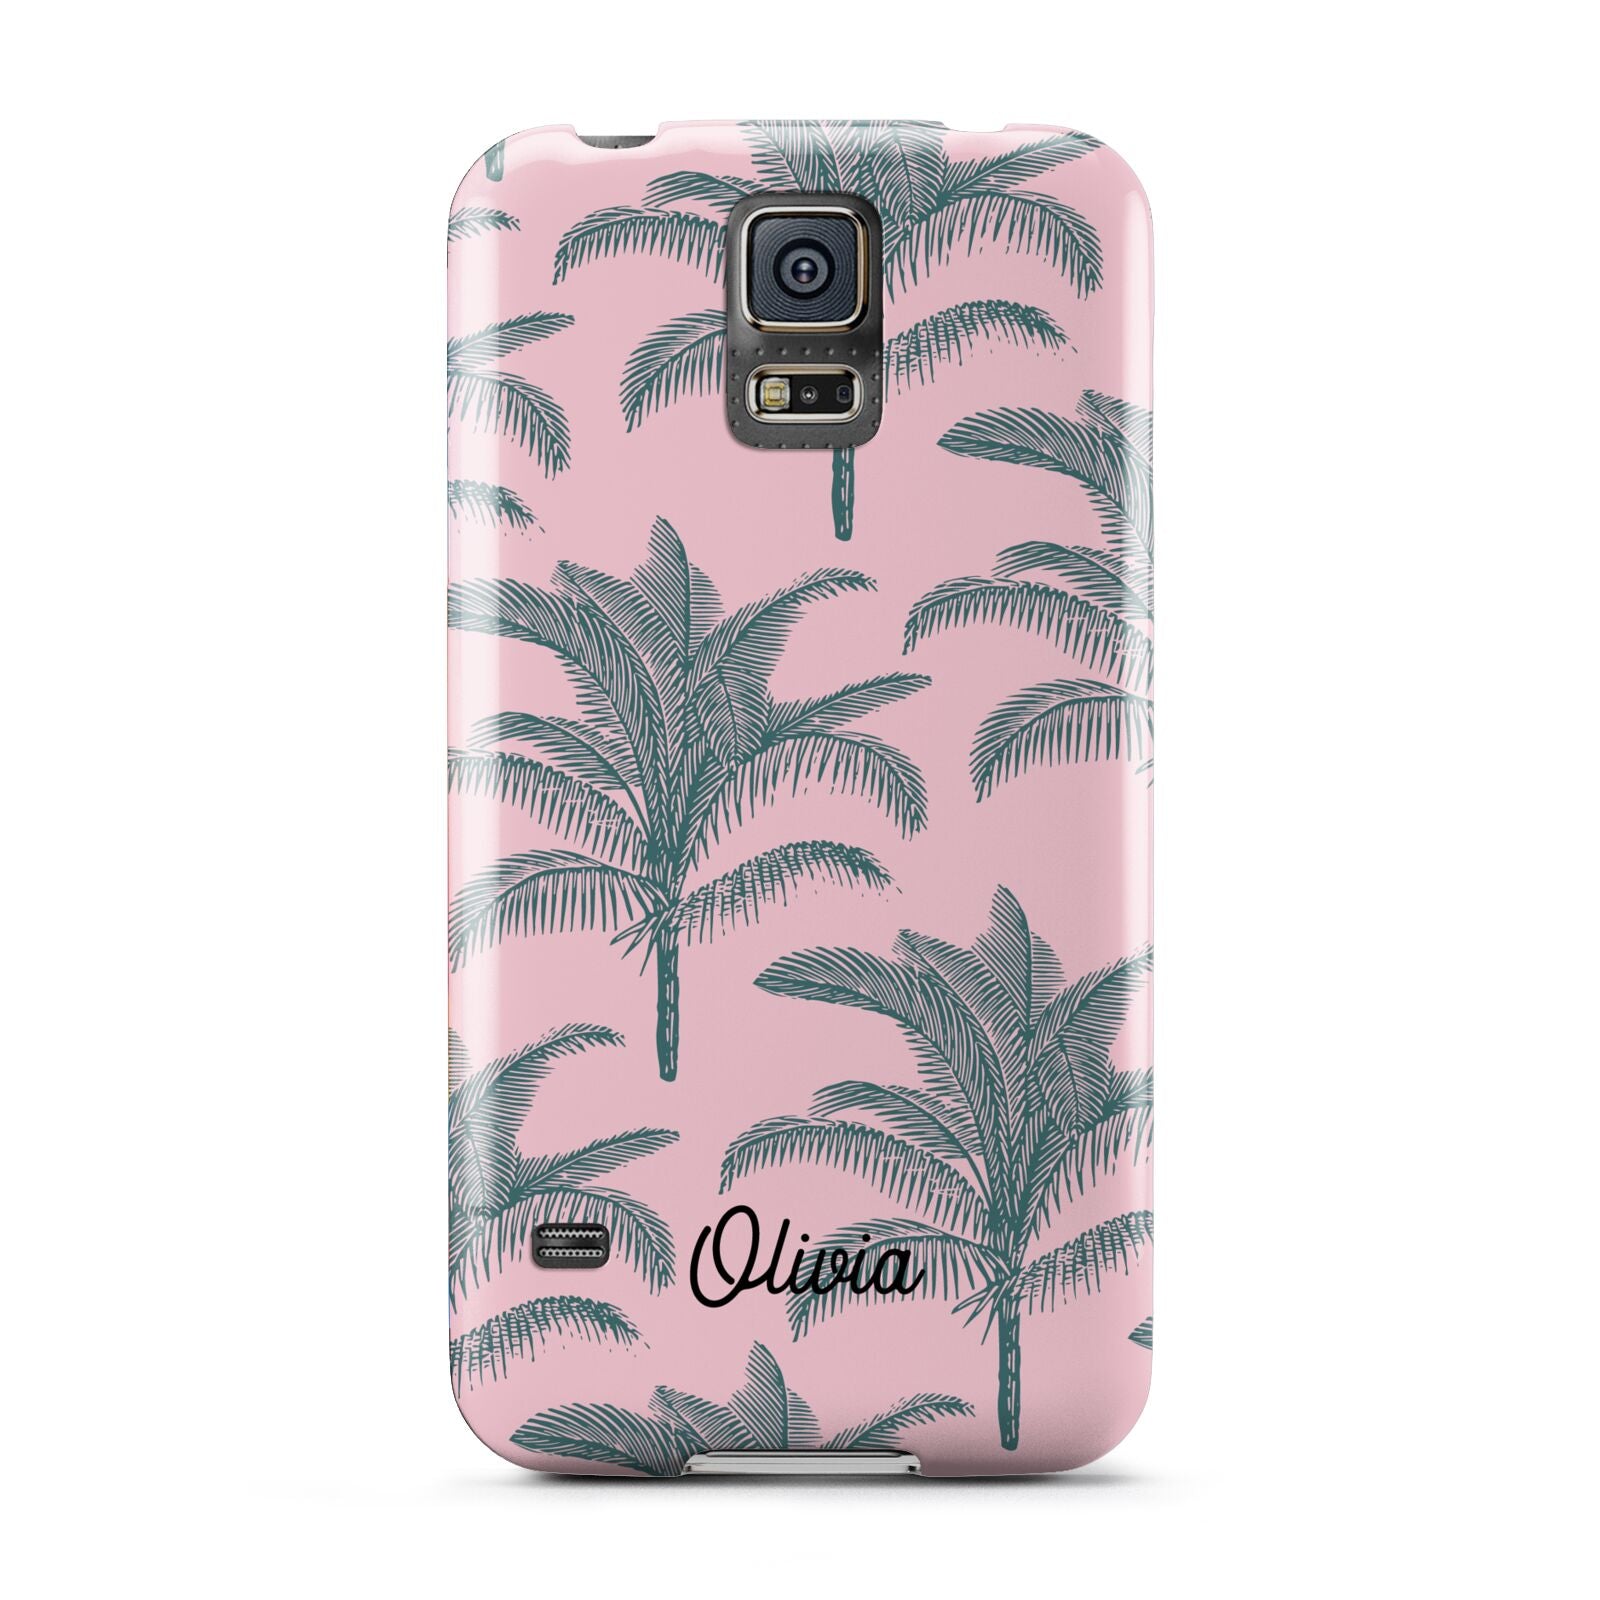 Personalised Palm Samsung Galaxy S5 Case